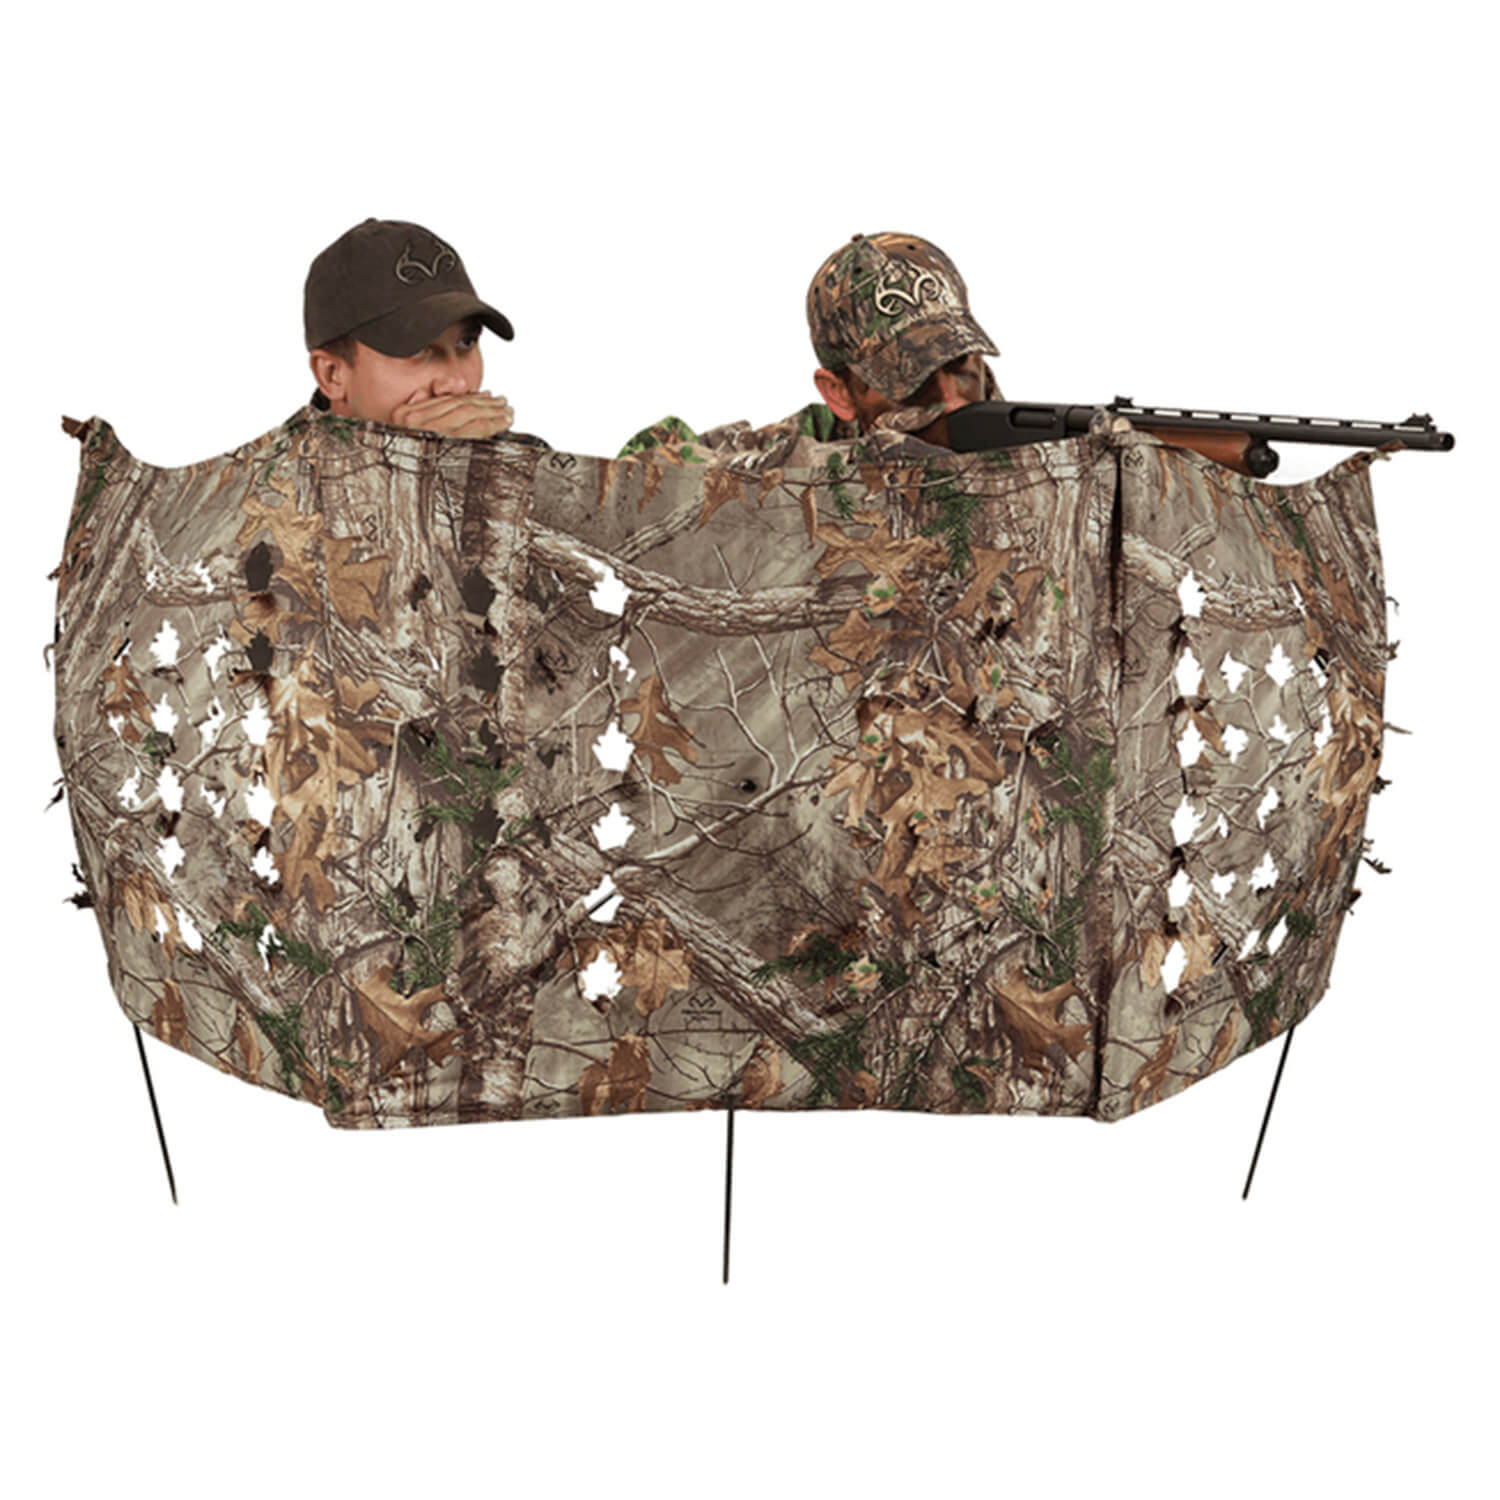 Ameristep Camouflage Tent Blind Throwdown - Camouflage Tents & Blindes